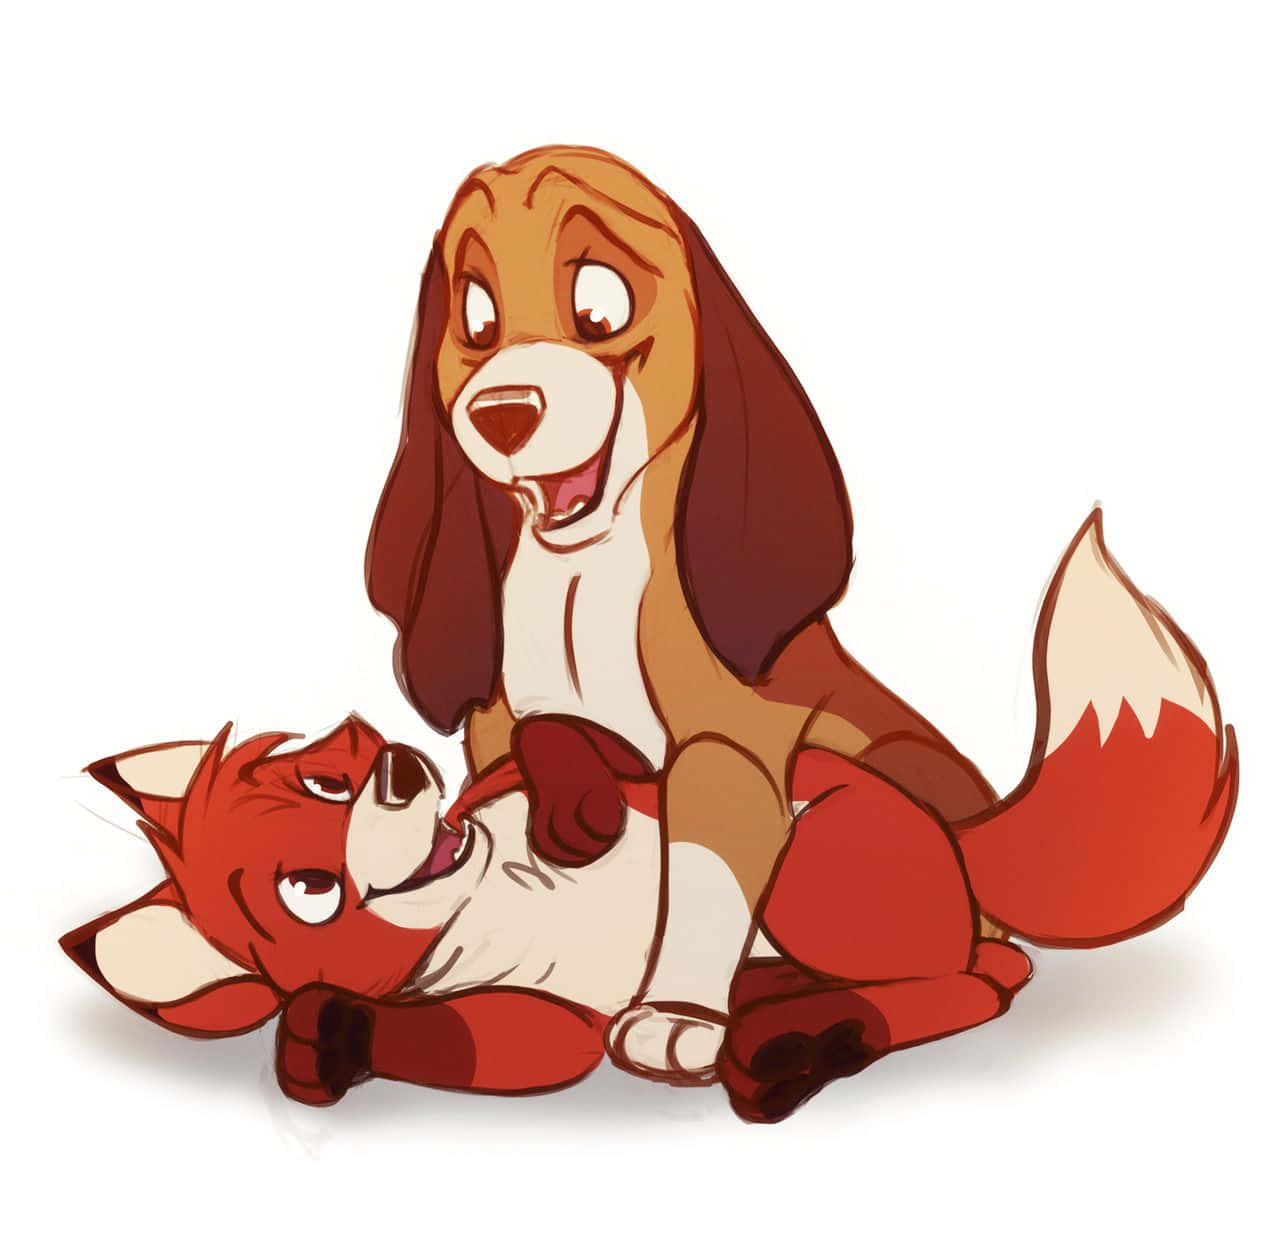 The Fox And The Hound: Unlikely Friendship Background